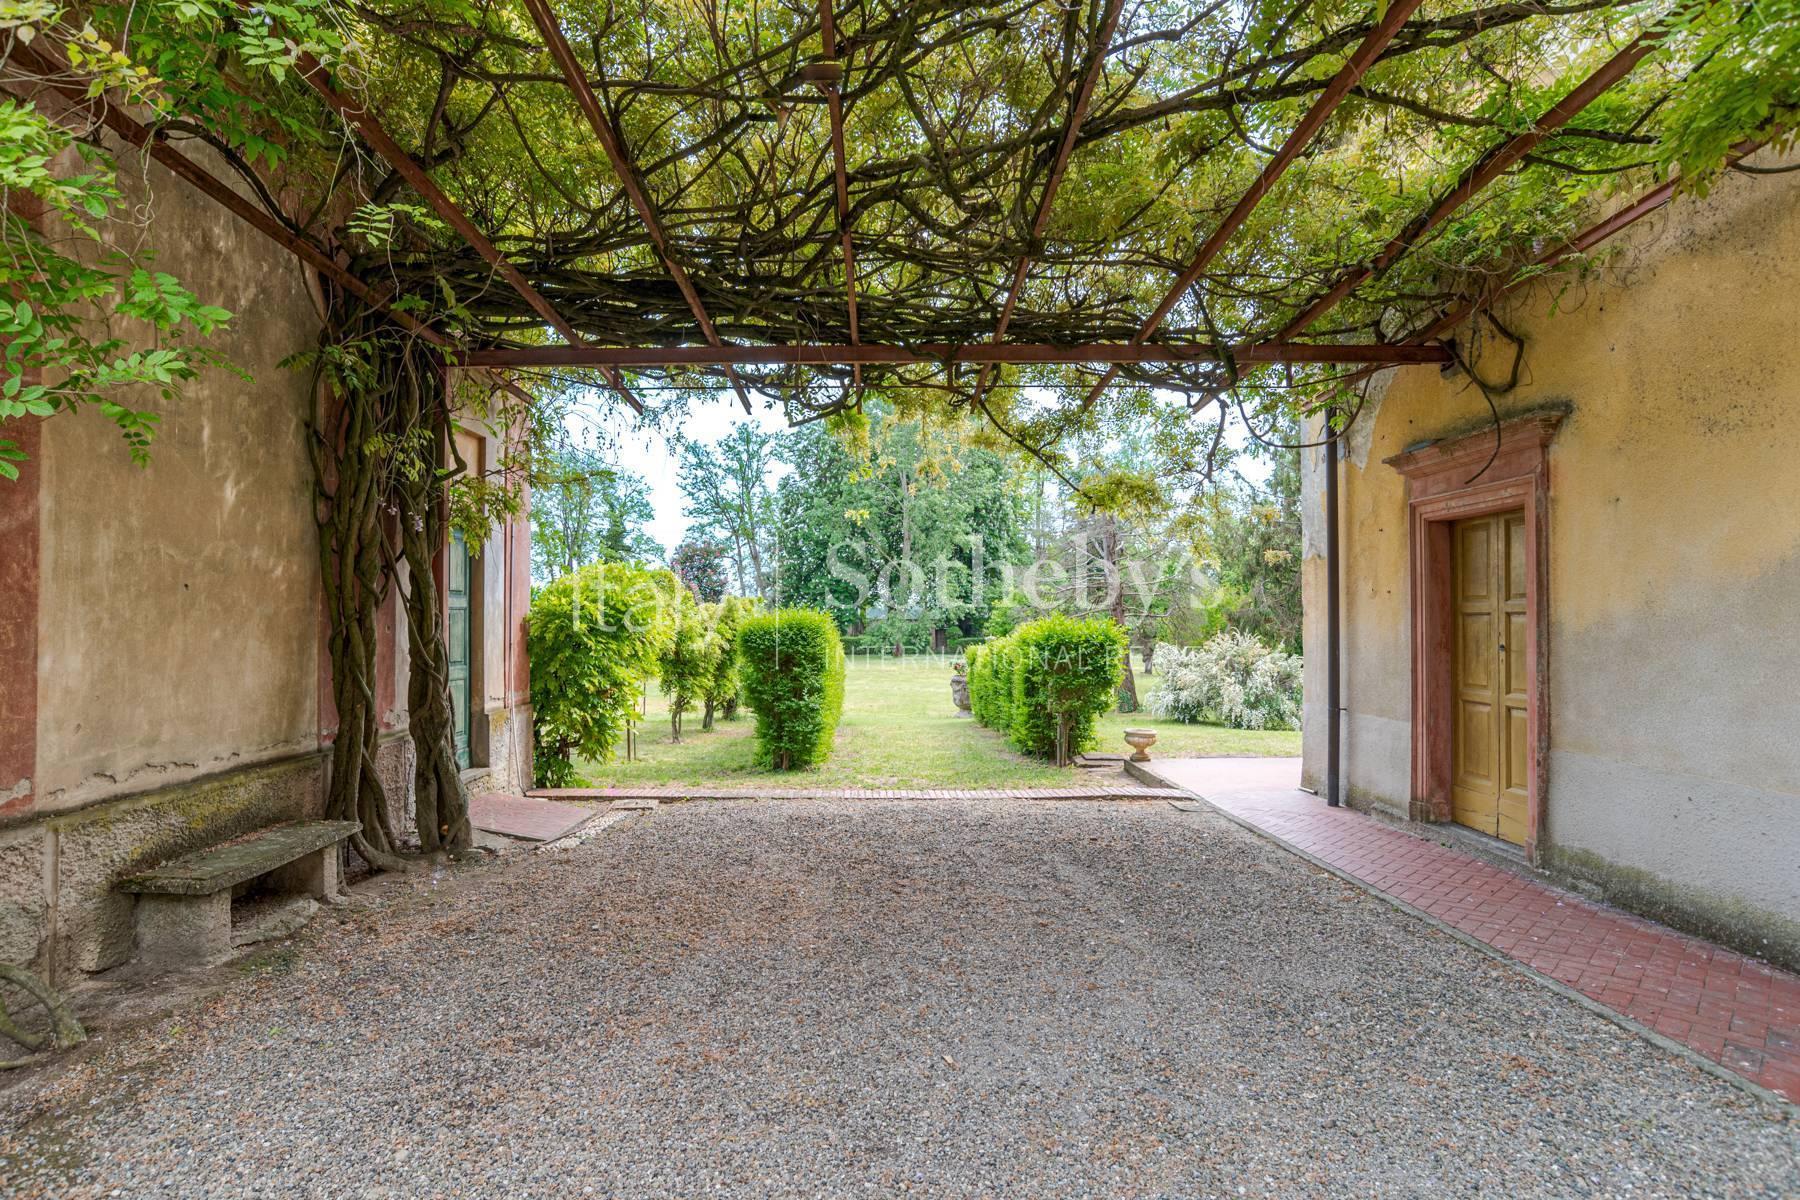 18th century villa with park in Oltrepo' Pavese - 10